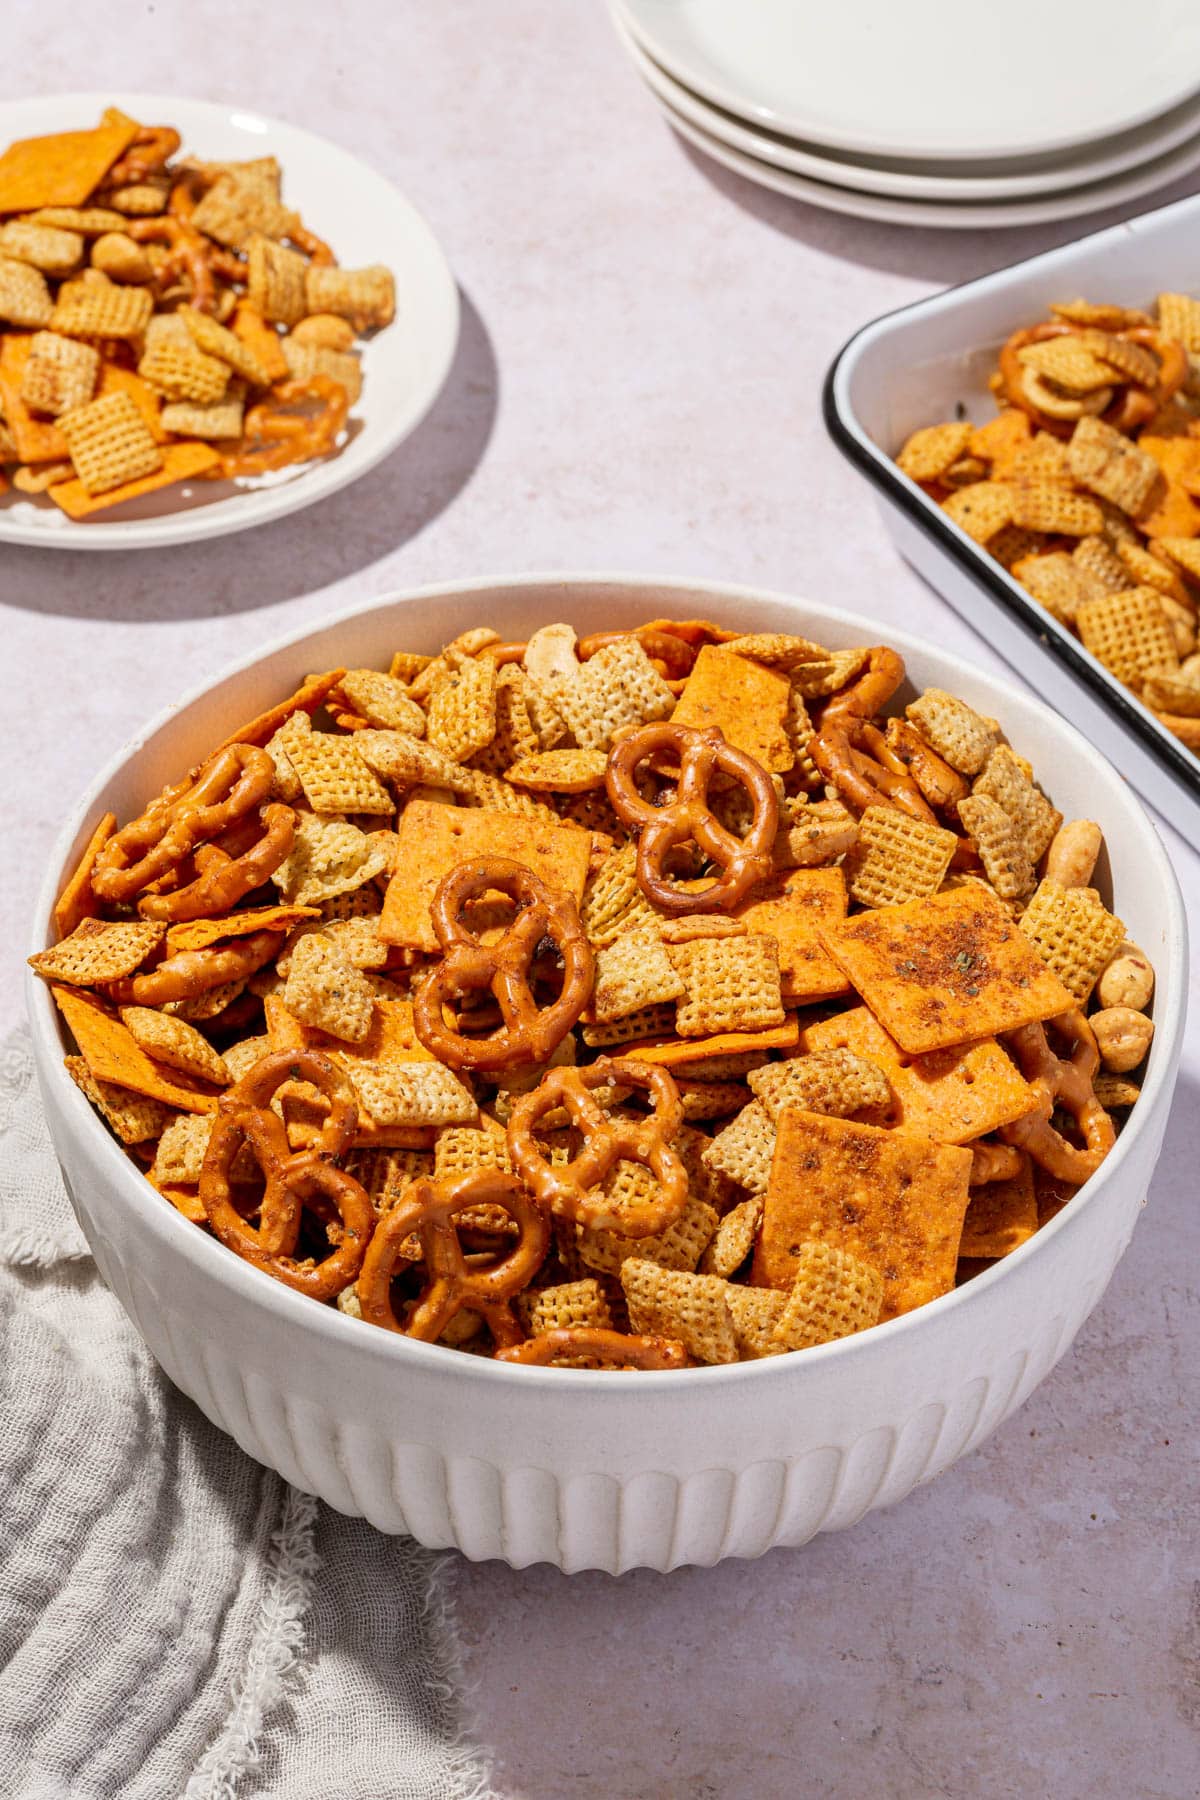 A serving bowl of gluten-free chex mix with a tray of more chex mix and a stack of appetizer plates in the background.